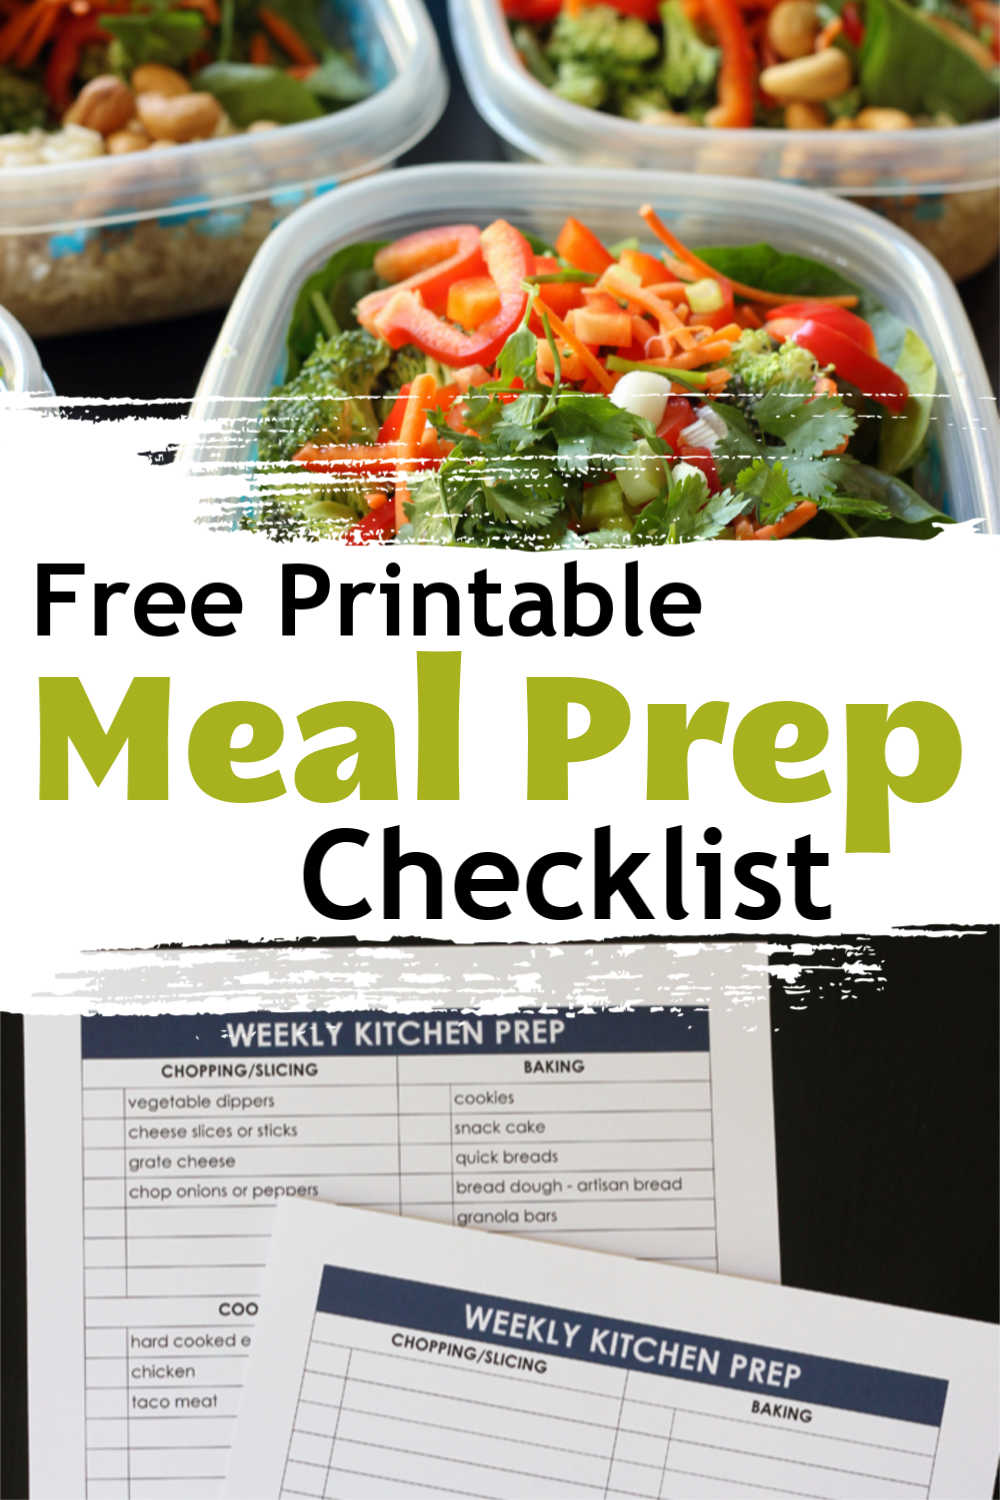 Checklist and prepped food